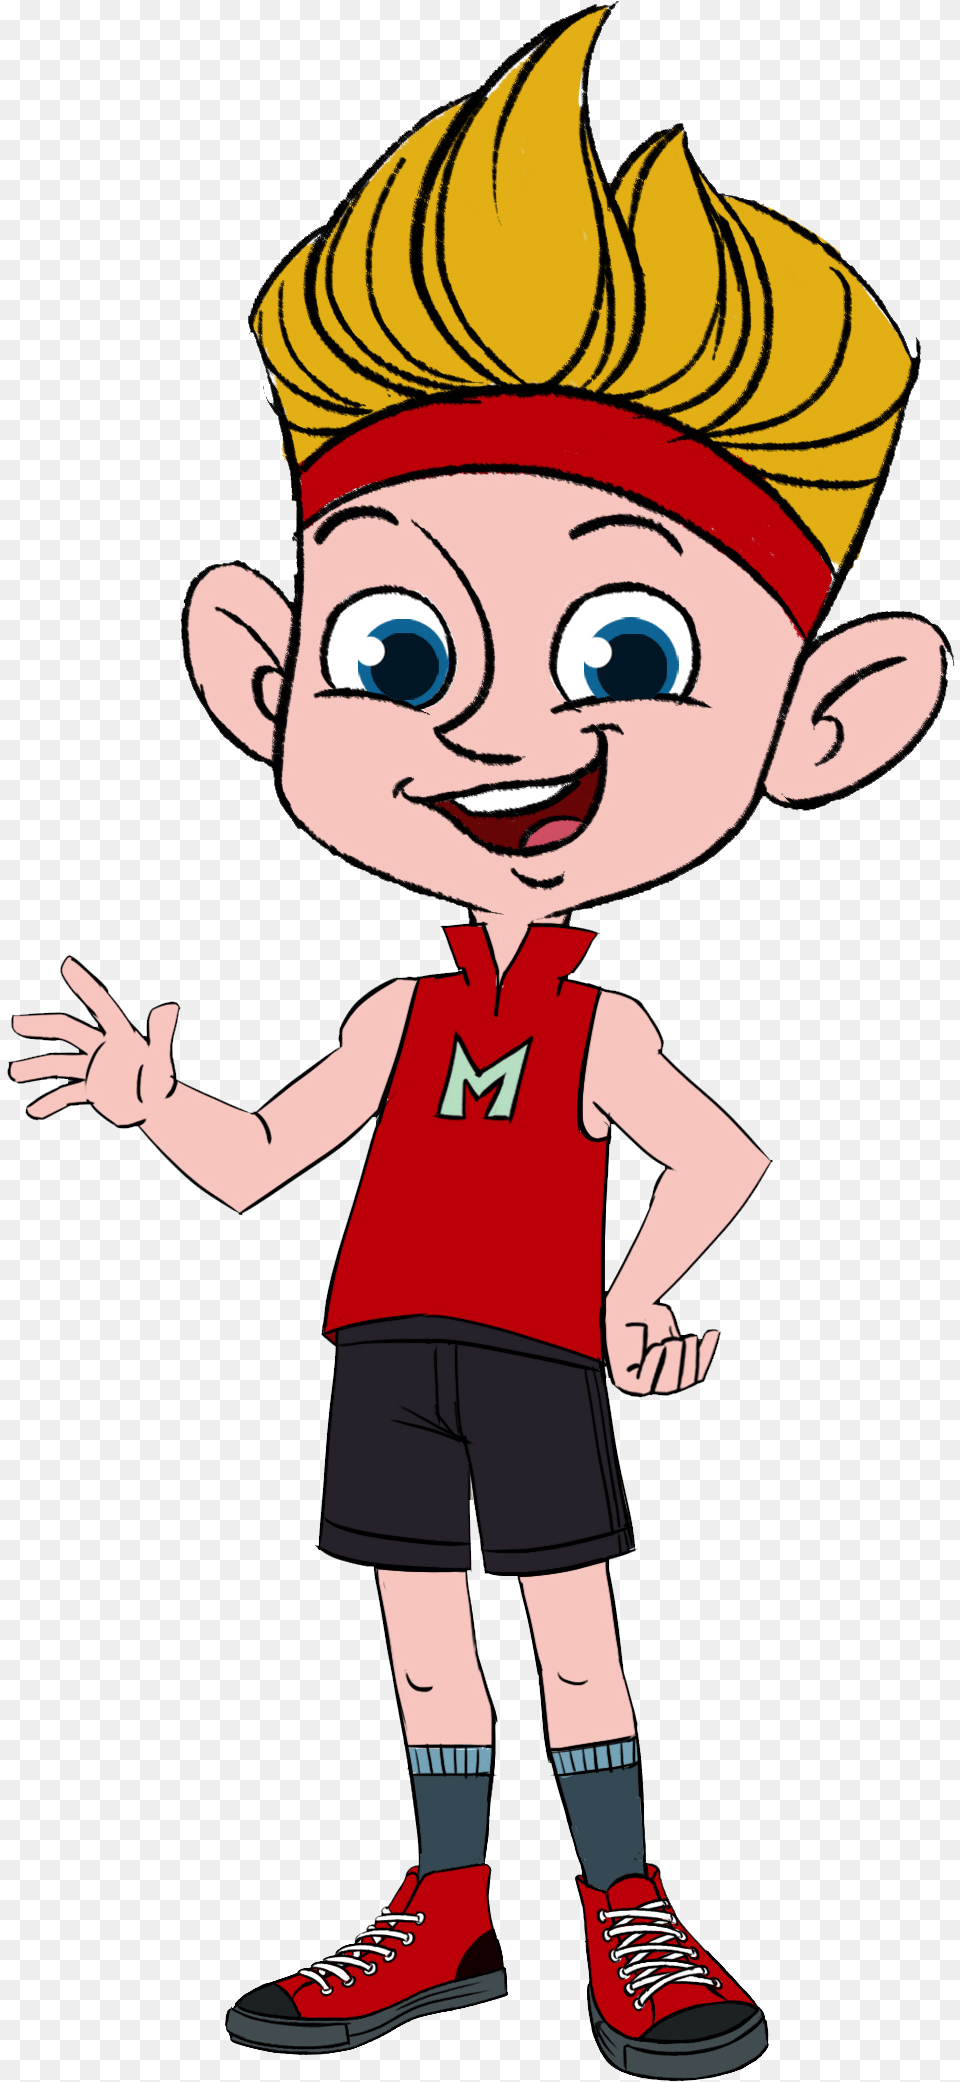 Welcome To Muscle Max And Friends Cartoon, Clothing, Shorts, Book, Comics Png Image